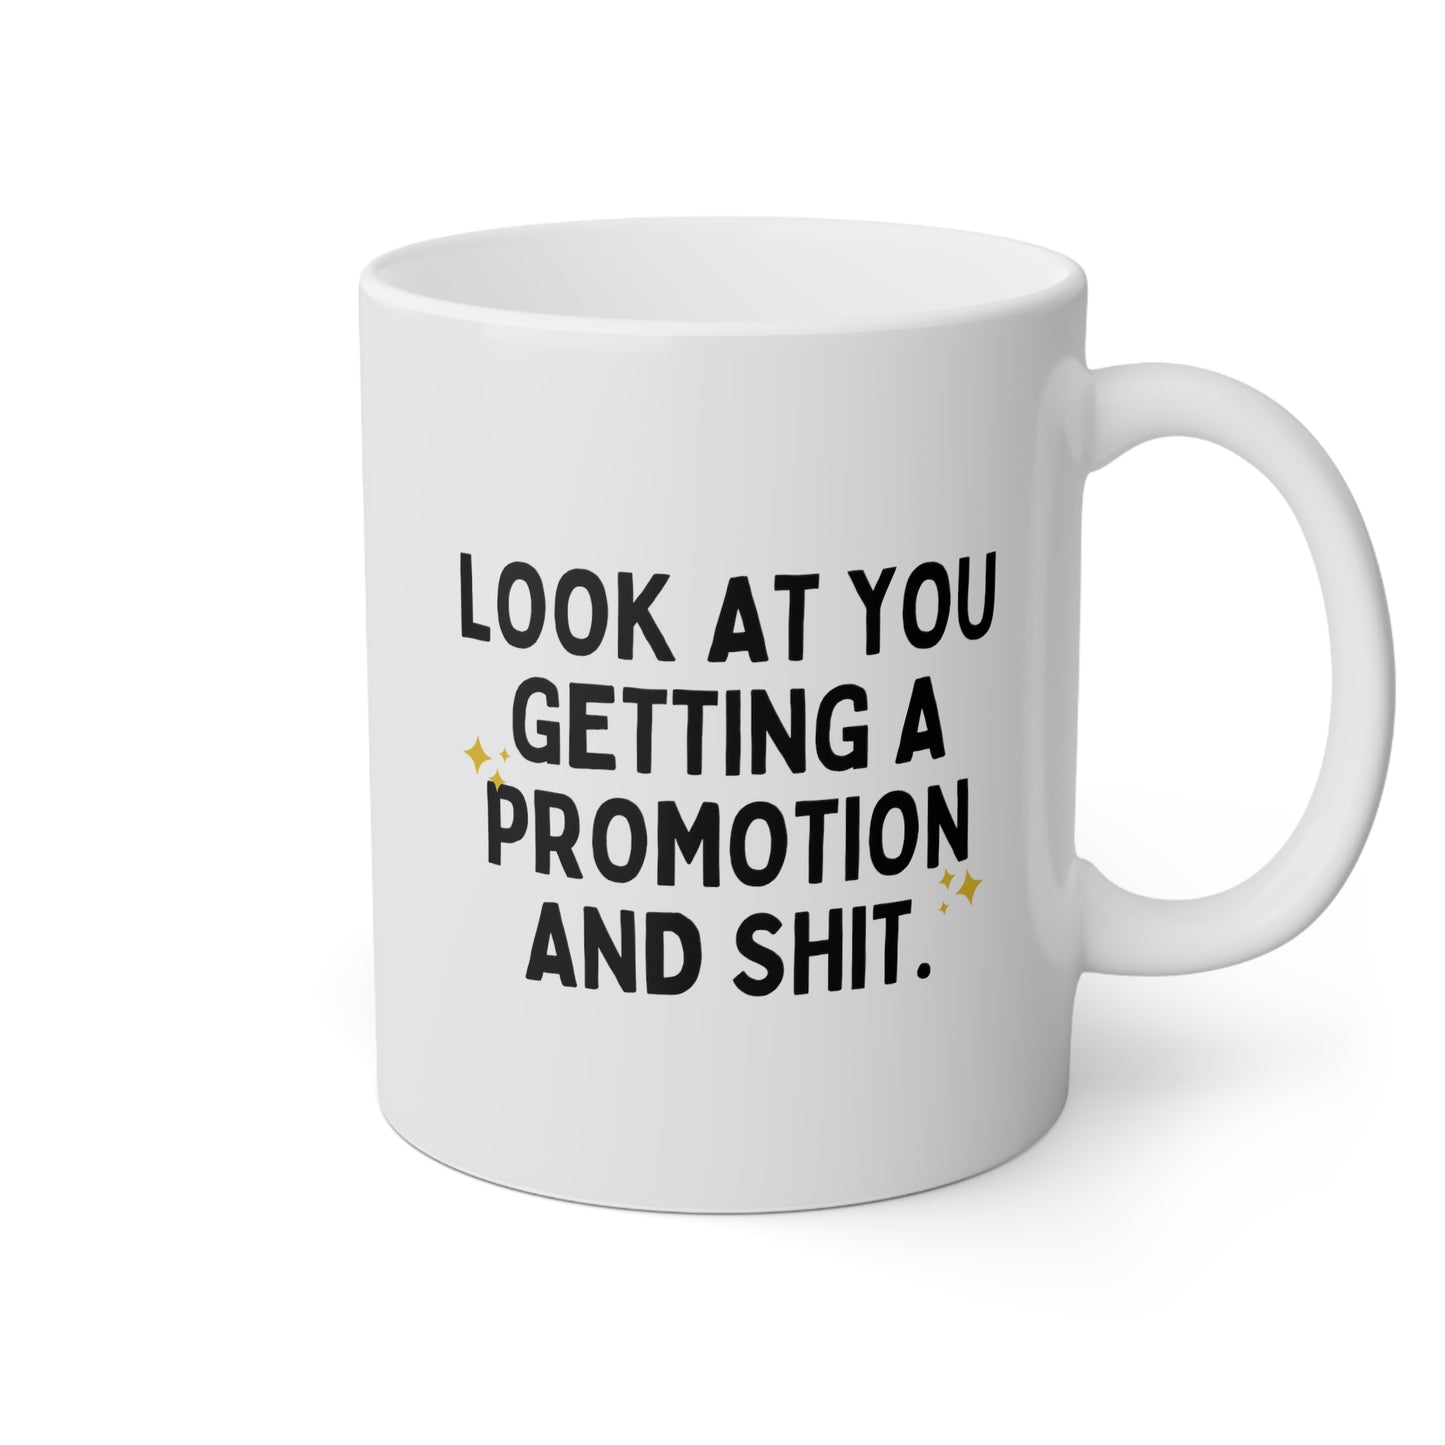 Look At You Getting A Promotion And Shit 11oz white funny large coffee mug gift for women men promoted coworker colleague congratulations waveywares wavey wares wavywares wavy wares